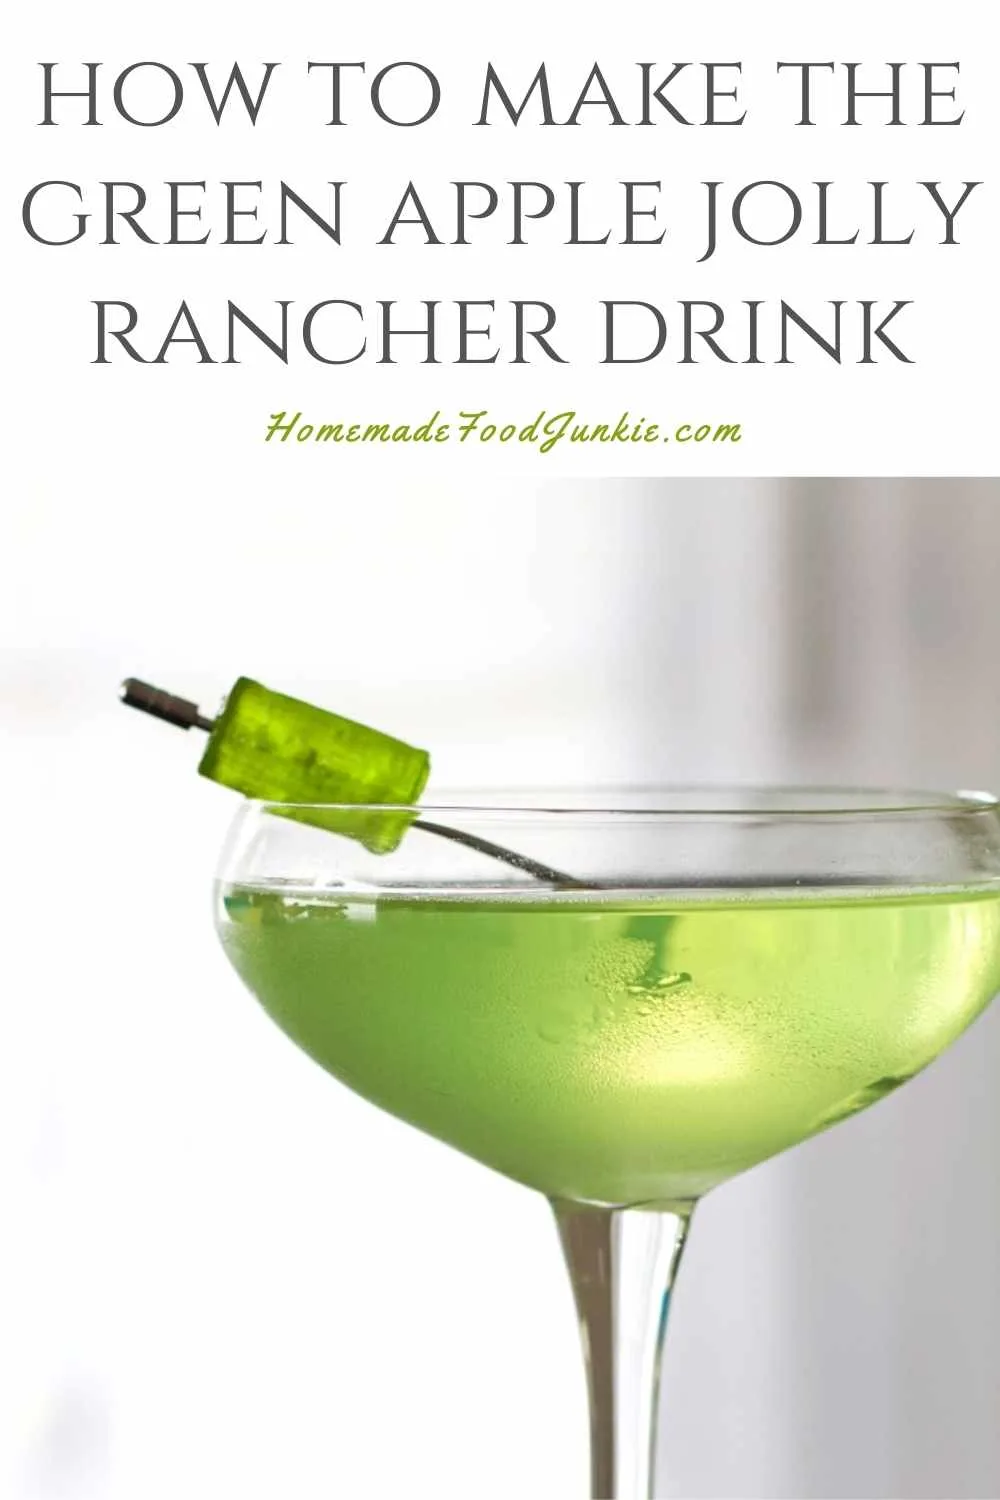 How To Make The Green Apple Jolly Rancher Drink-Pin Image